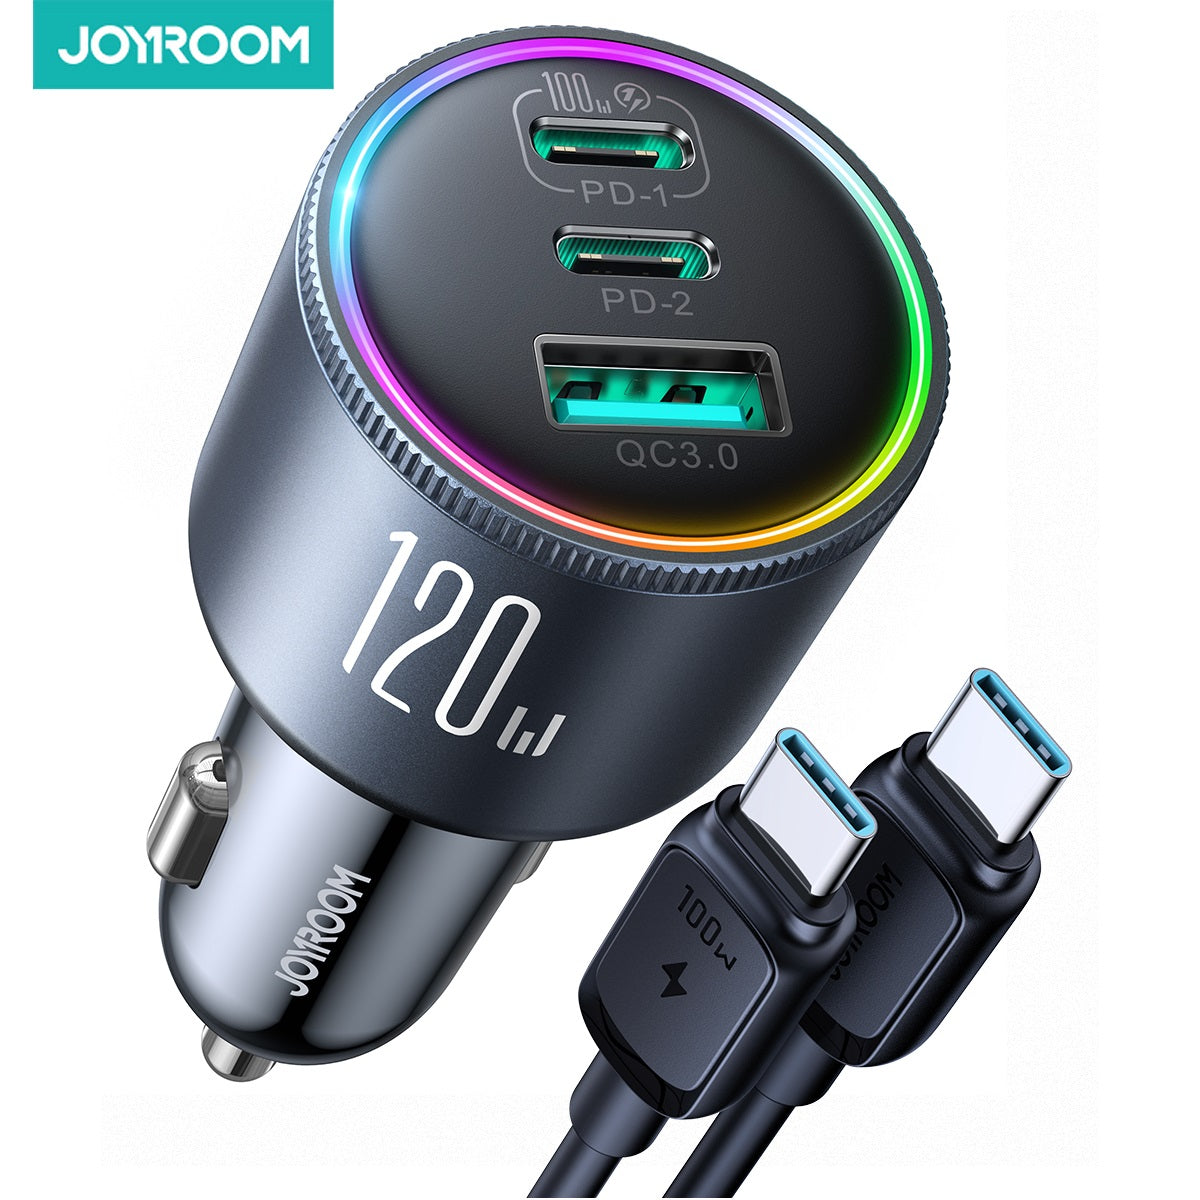 JR-CCN07 120W 3-Port (2PD+1QC3.0) Car Charger-Dark Gray（with C TO C 100W Cable）